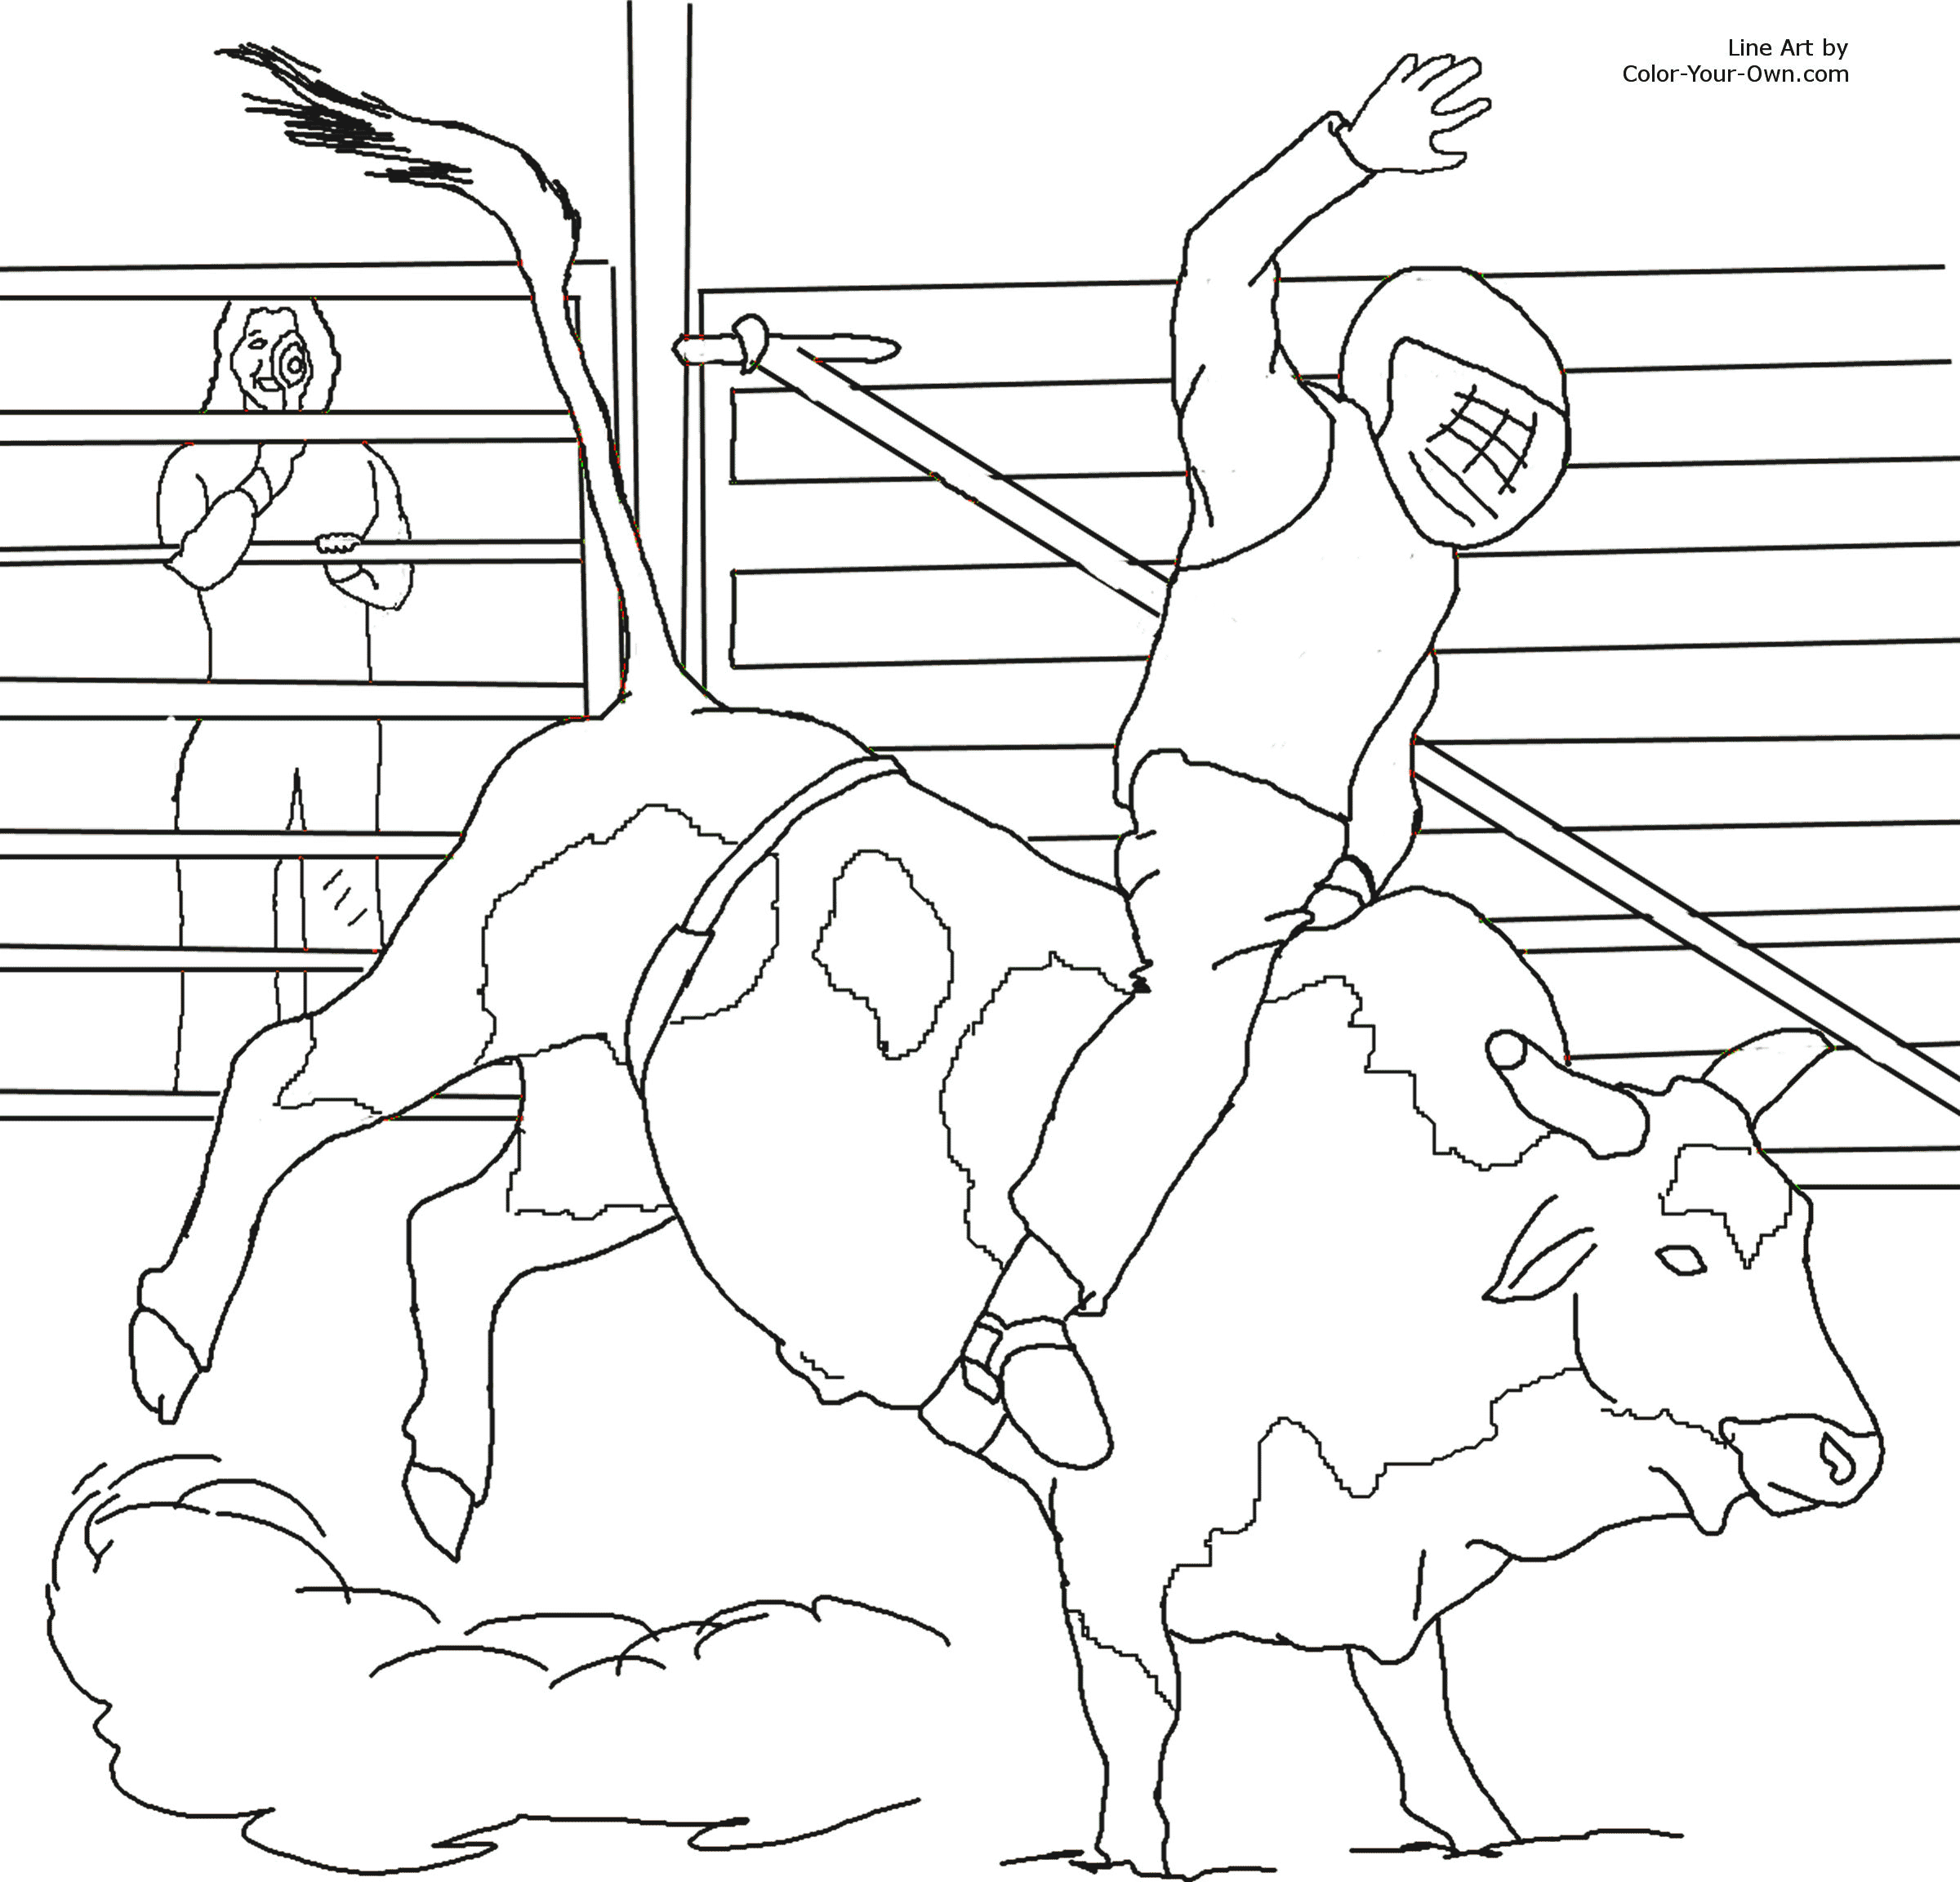 419 Simple Coloring Pages Of Bull Riding with Animal character